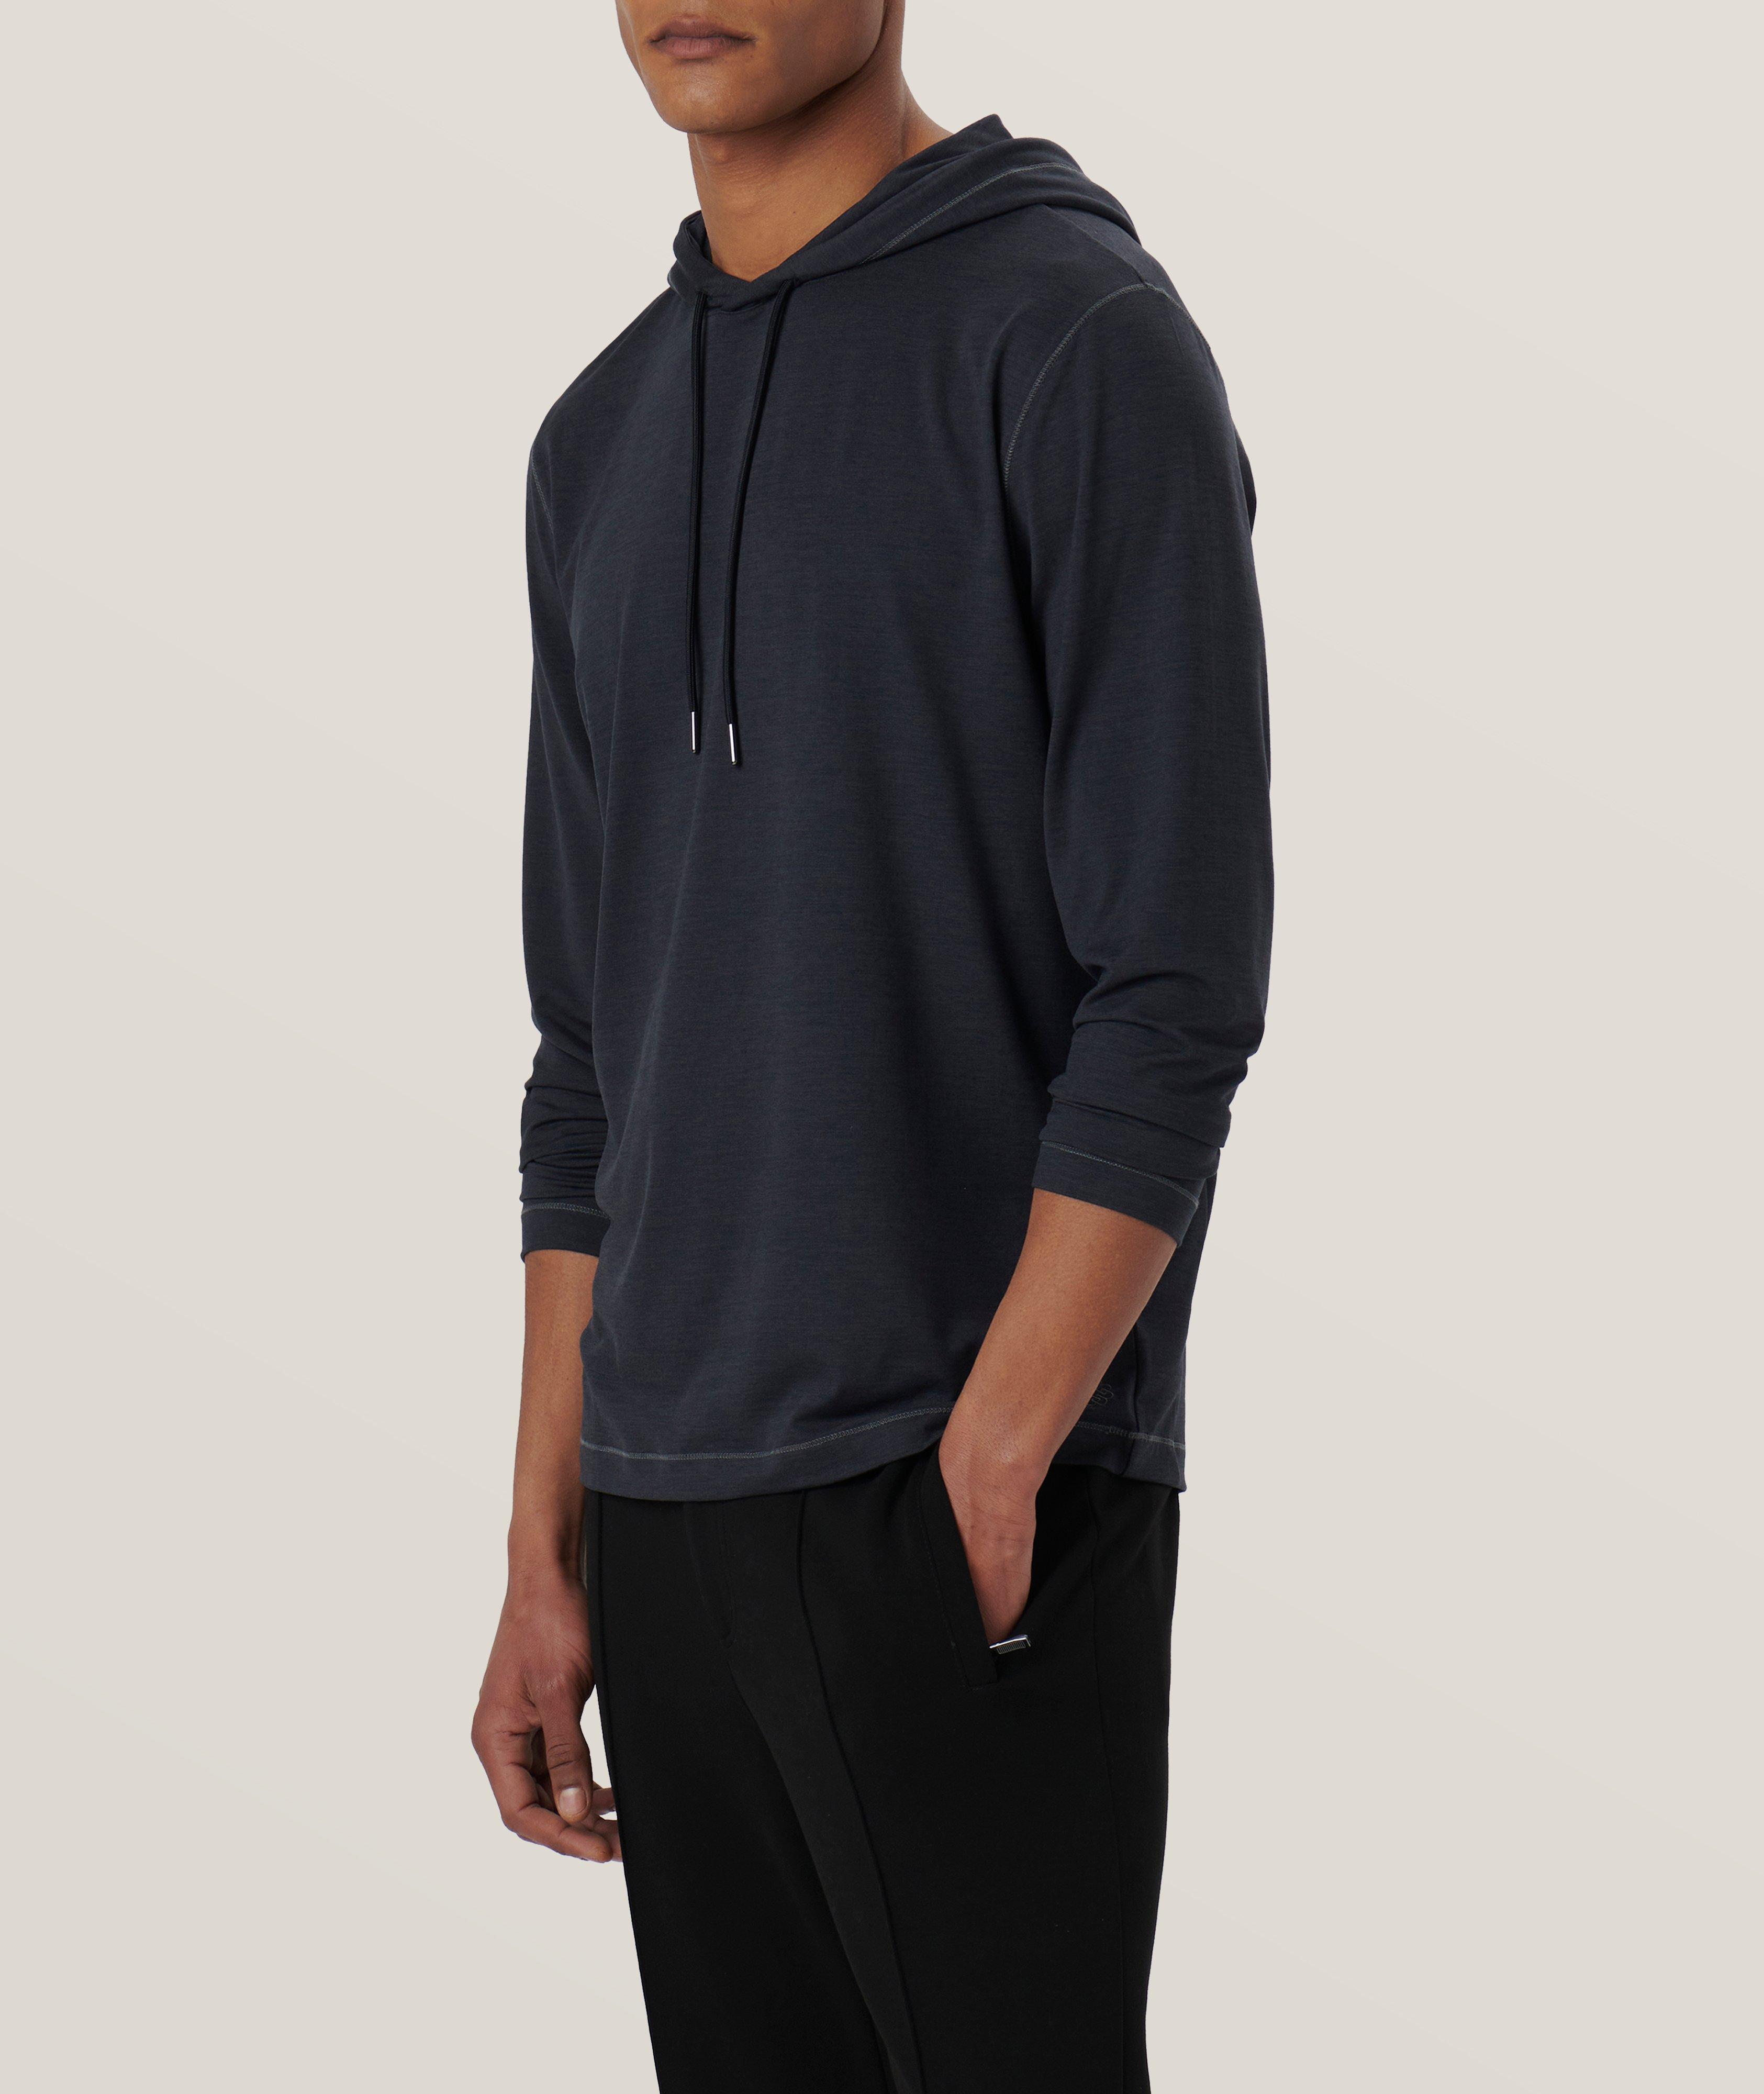 UV50 Performance Stretch-Fabric Hooded Sweater image 3